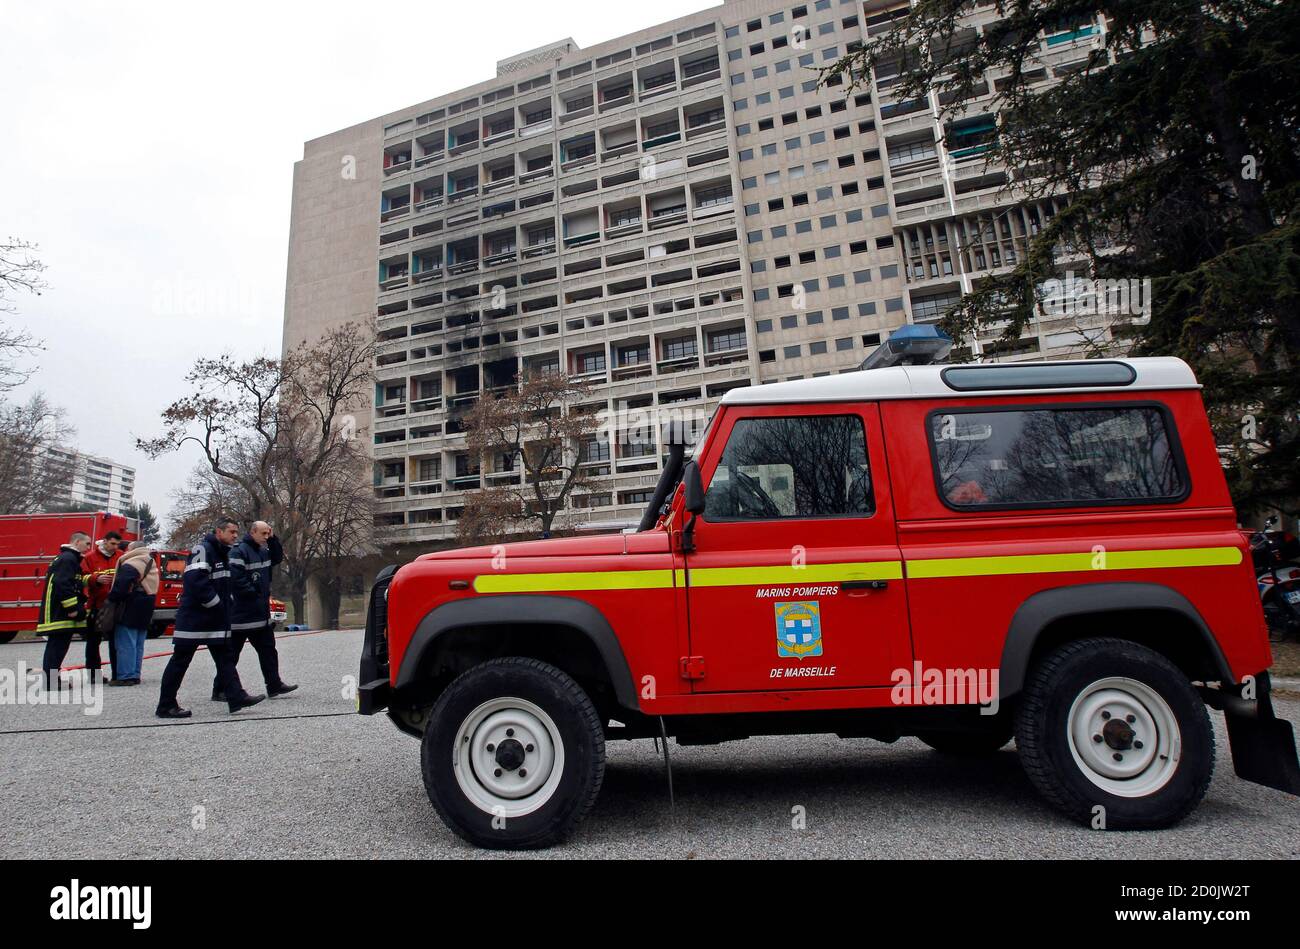 Firemen Gather The Day After A Fire Which Destroyed Eight Flats At The Cite Radieuse The Radiant City Building Designed By The French Architect Le Corbusier S In Marseille February 10 12 The